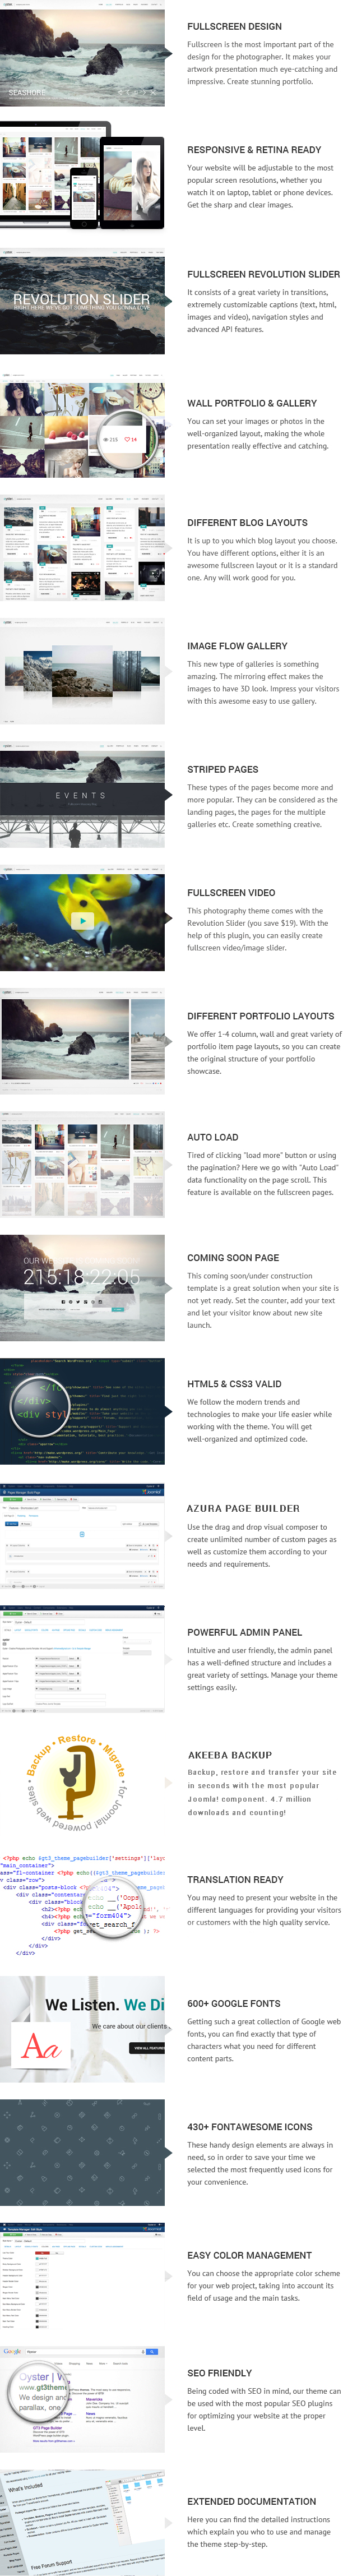 oyster joomla template features - Oyster – Creative Photography Joomla Template